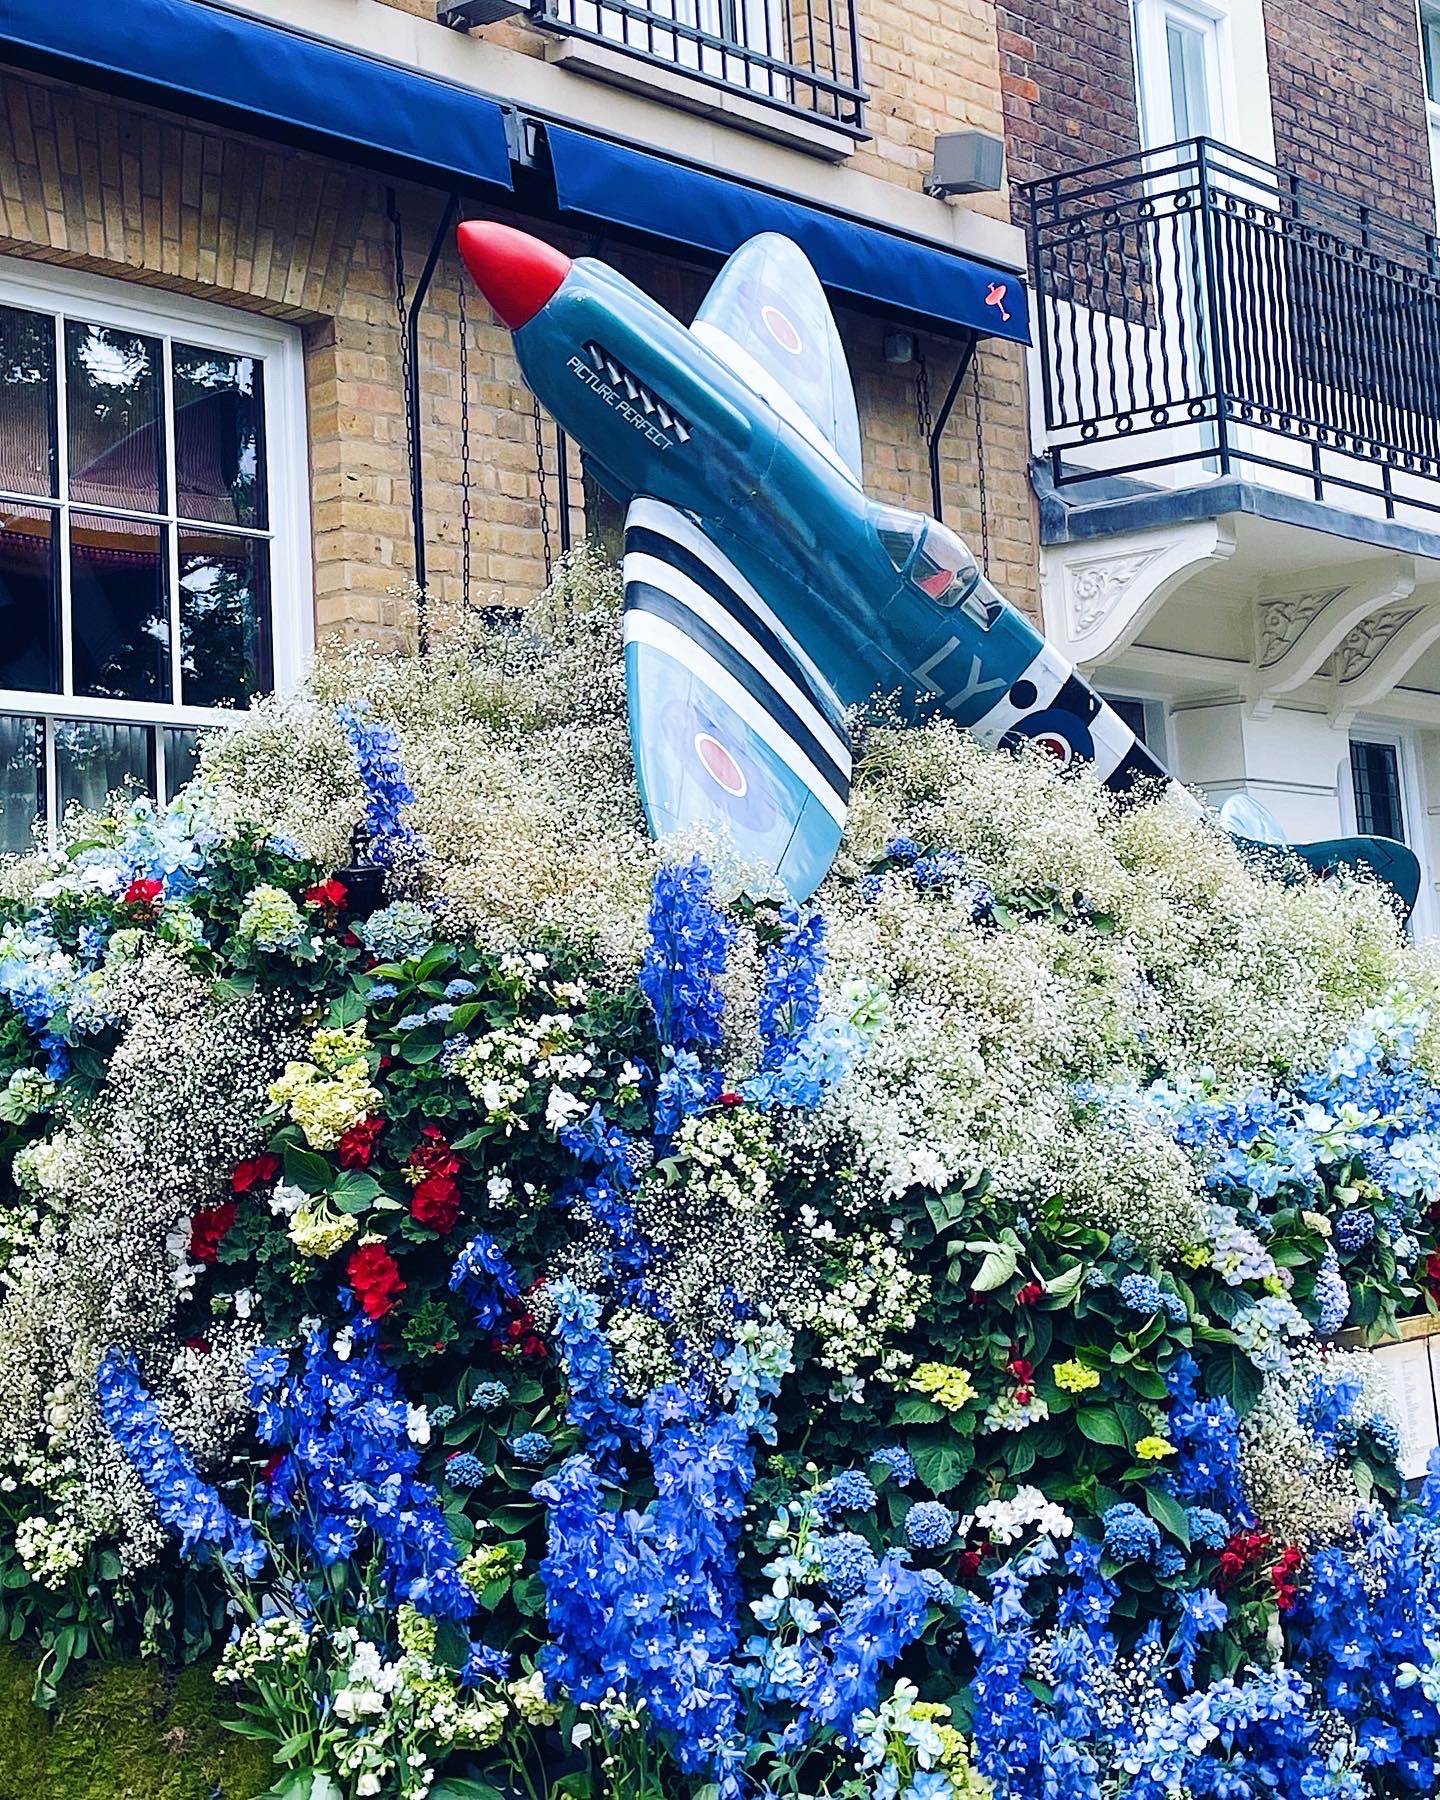 A blue plane bursting out of a floral display.